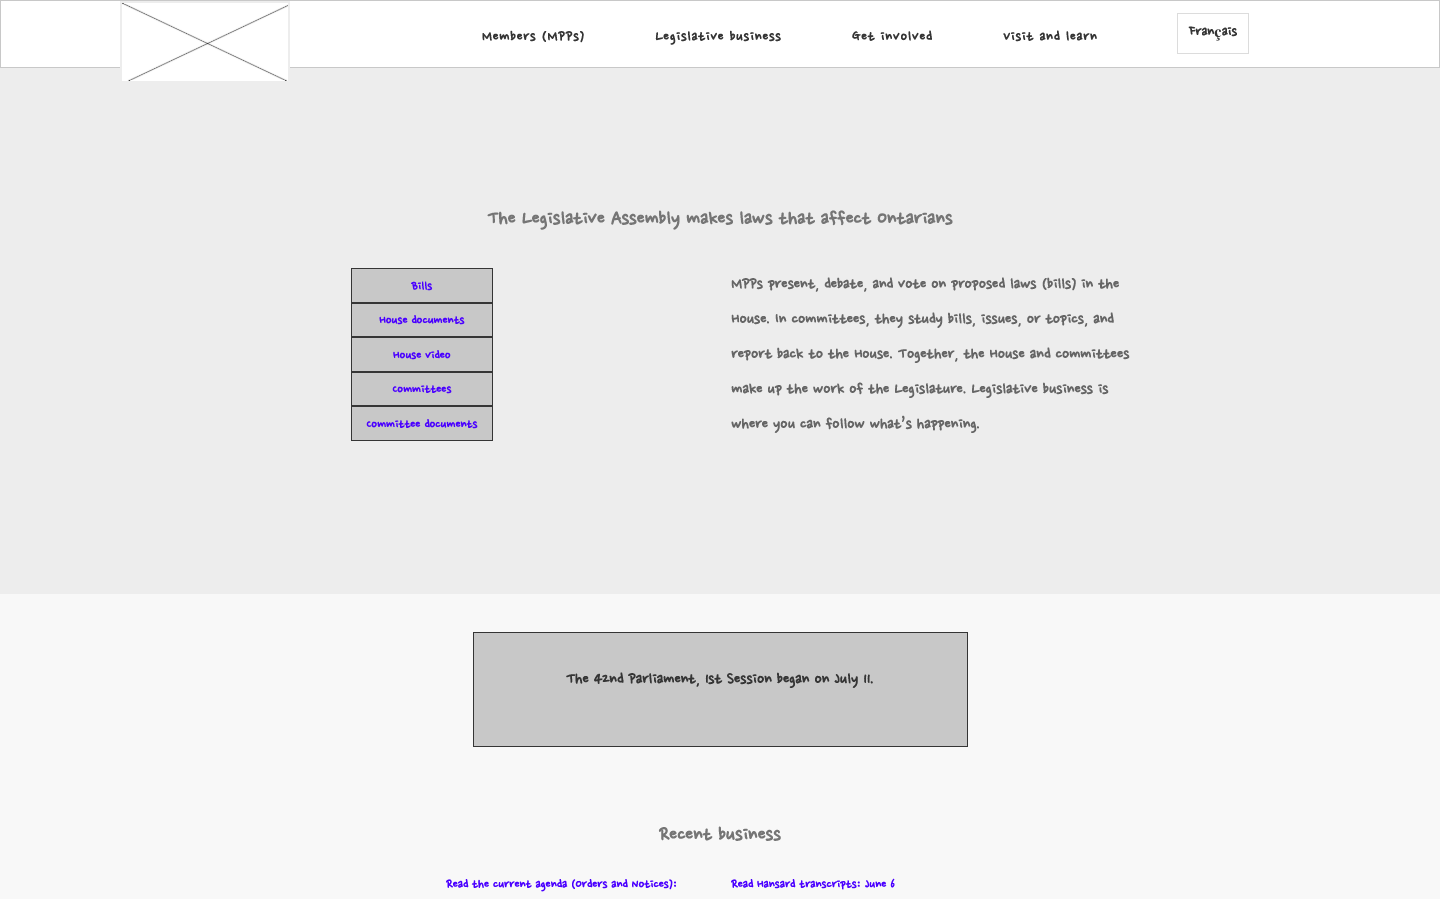 Wireframe of the Legislative Business landing page